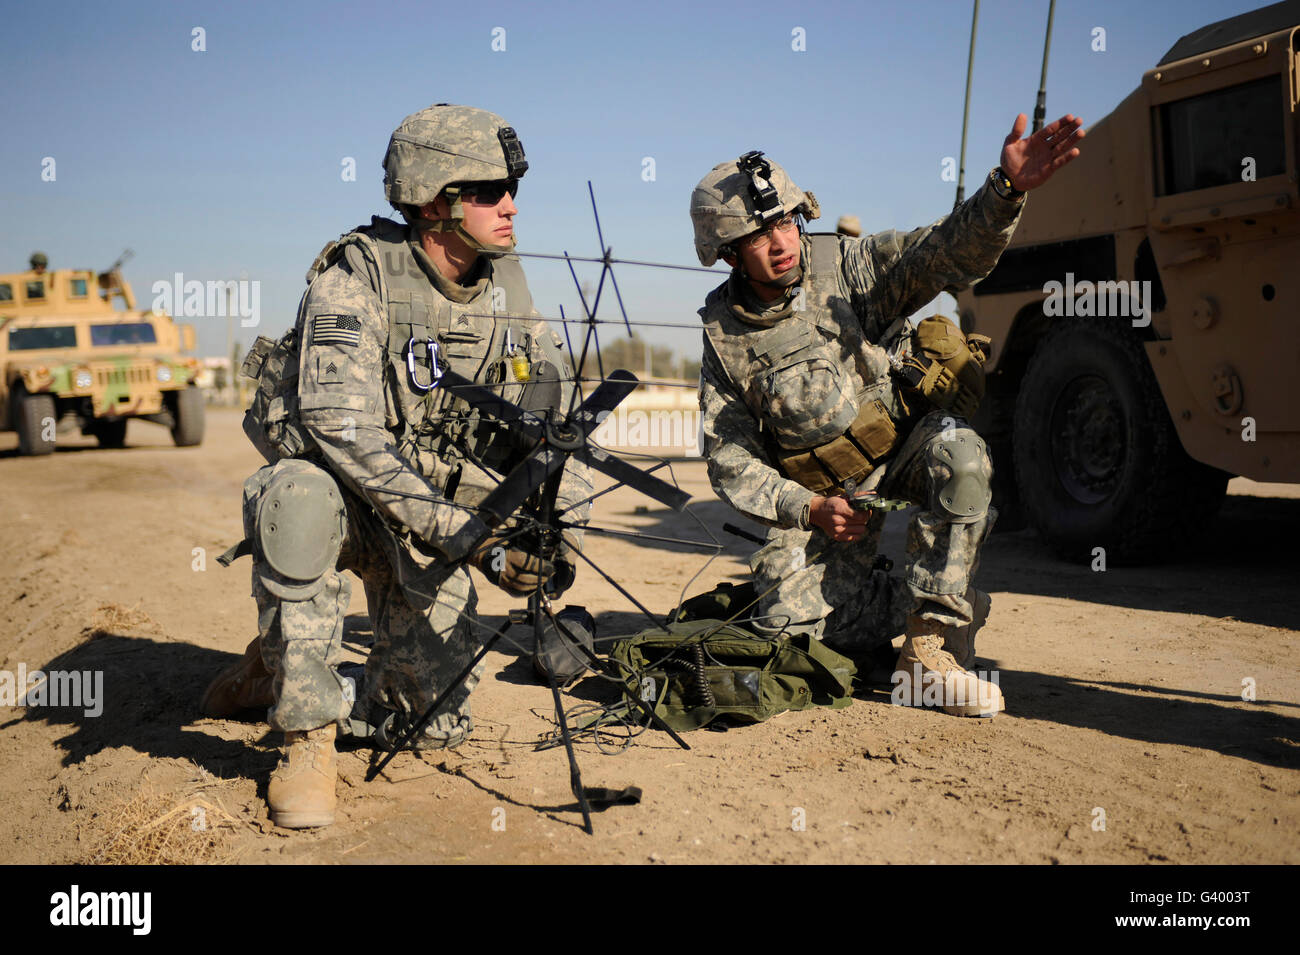 U.S. Army soldiers setting up a tactical satellite radio in Afak, Iraq. Stock Photo